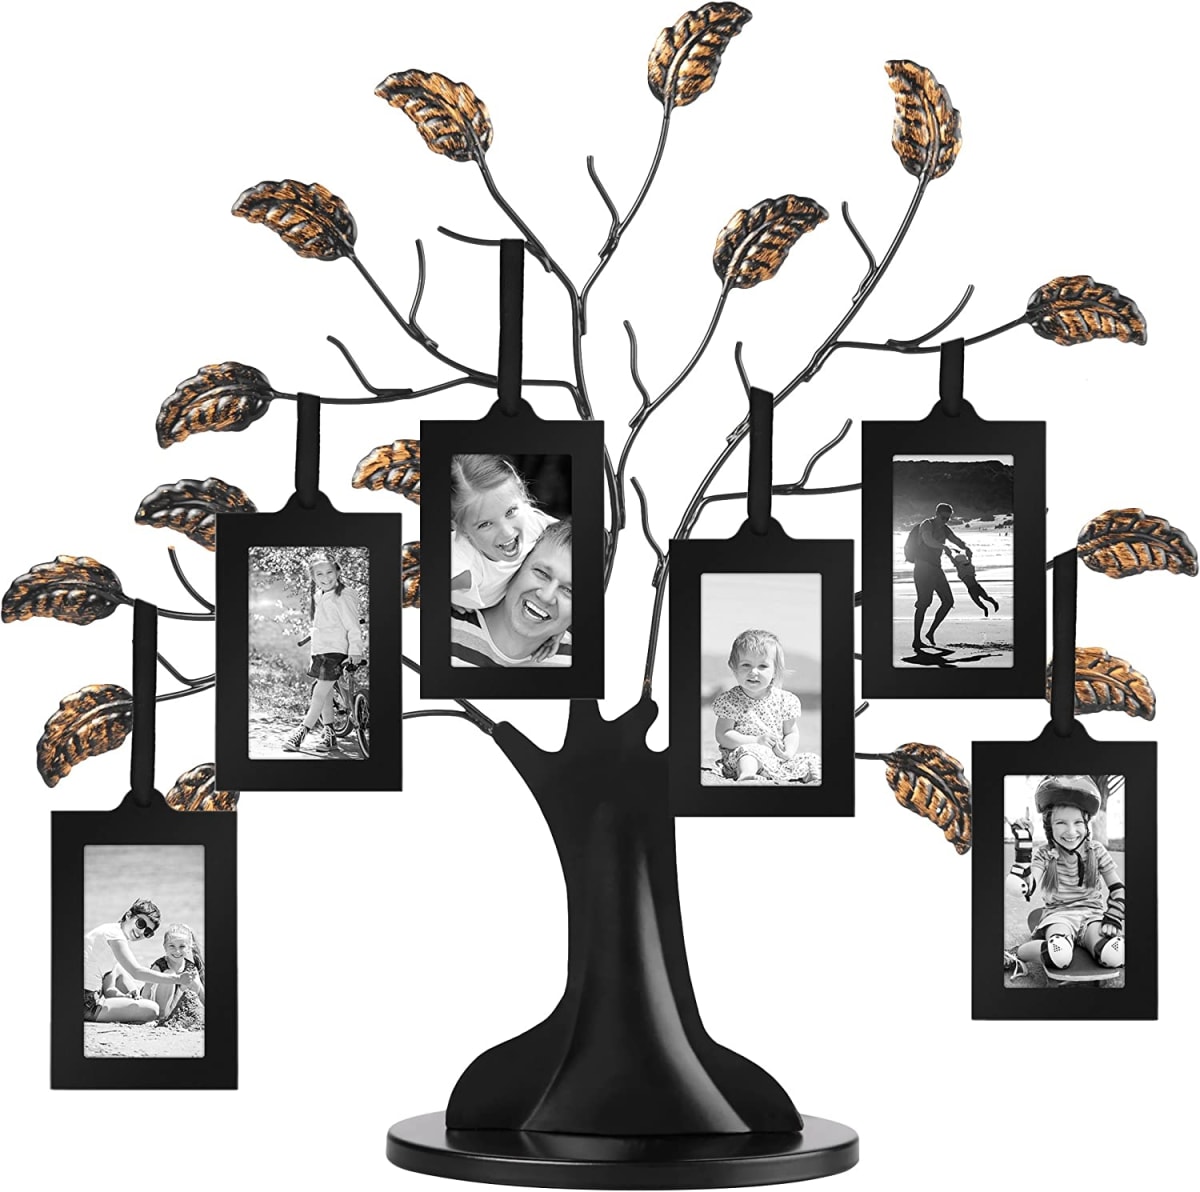 Bronze Family Tree with 6 Hanging Picture Frames 2" x 3" in Black and Adjustable Ribbon Tassels - 12"